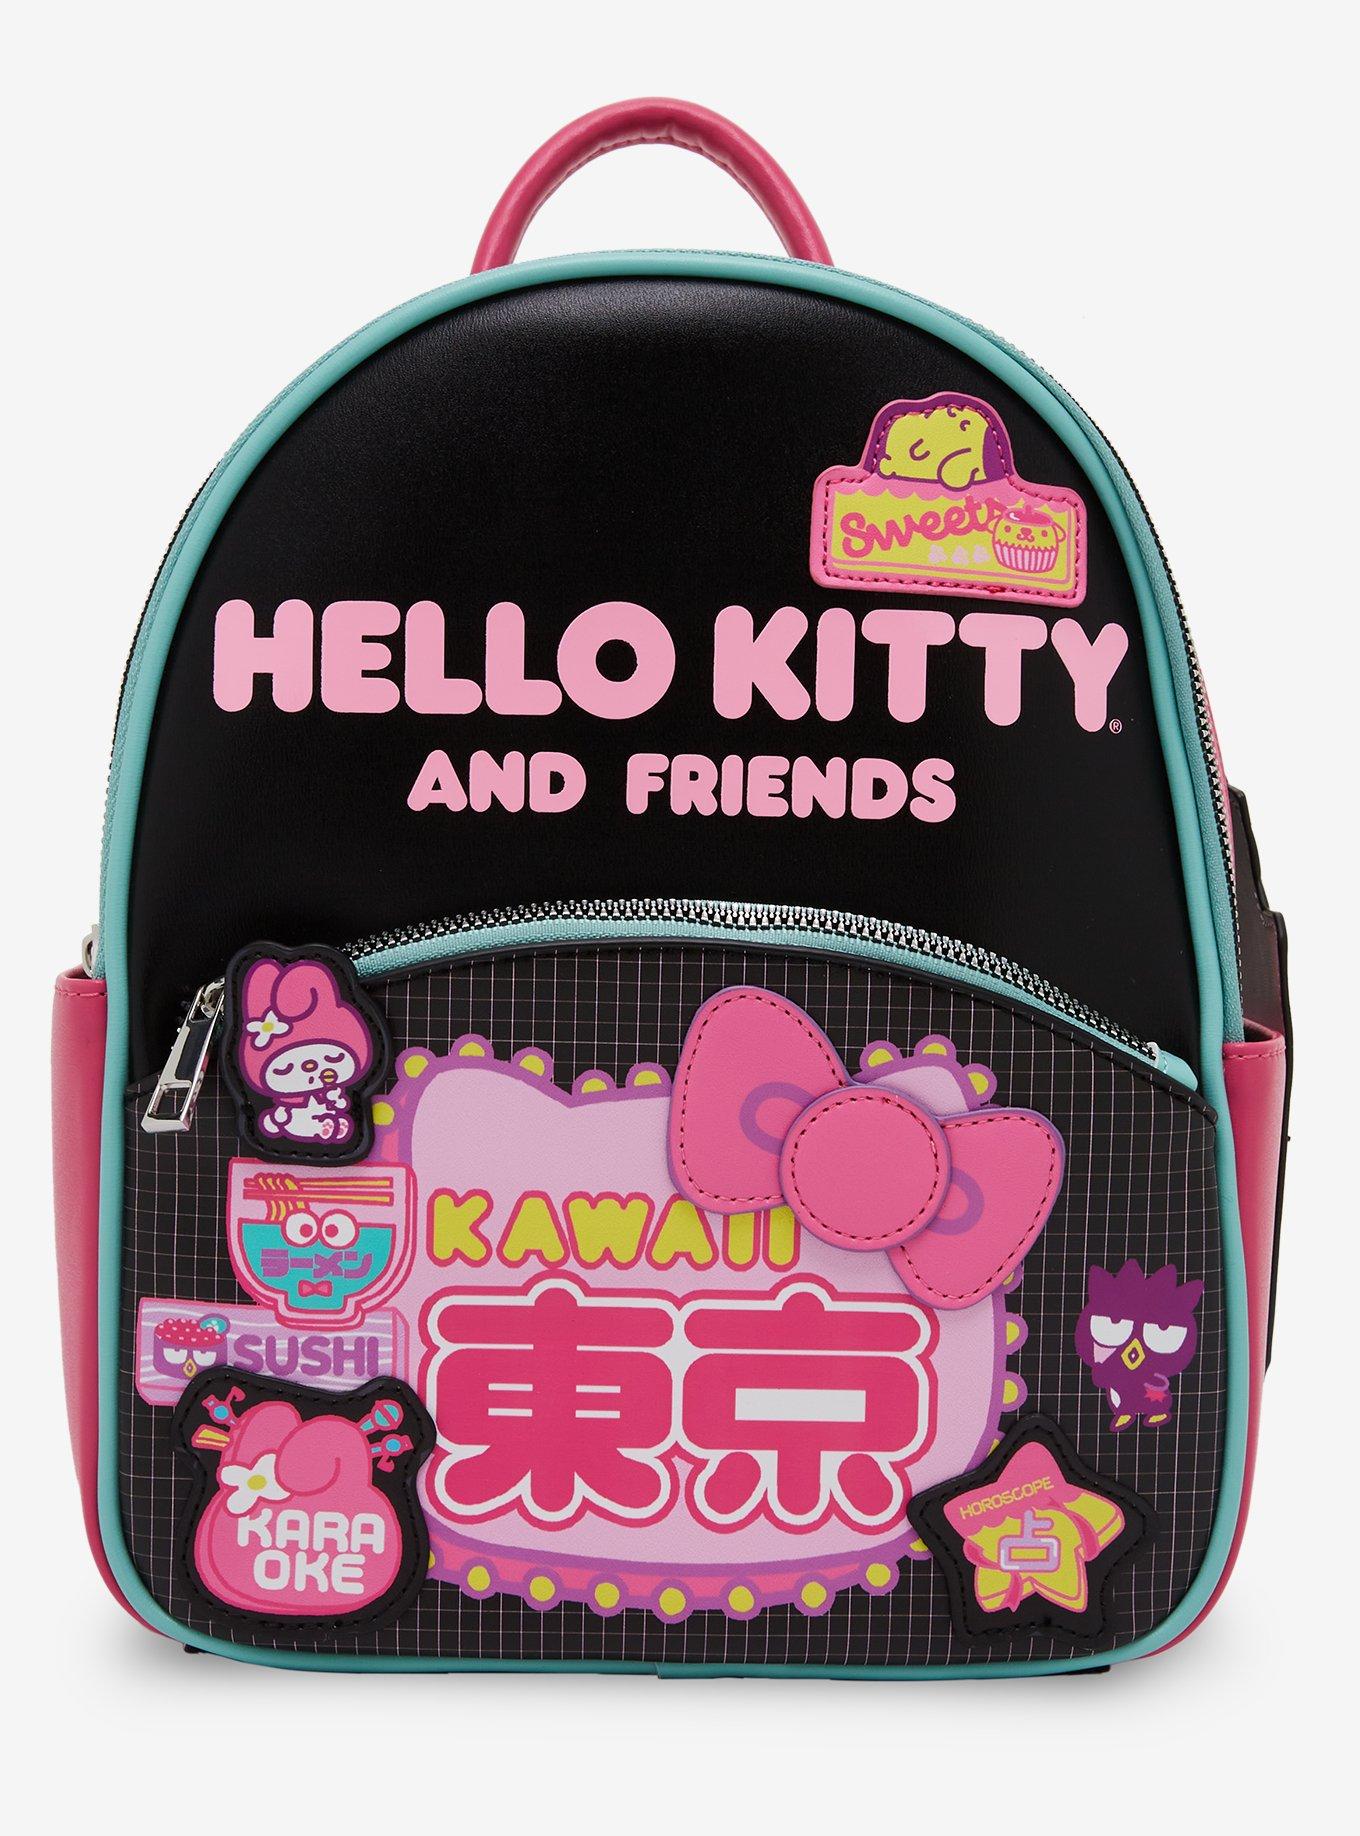 Hello Kitty, Bags, Limited Edition Large Hello Kitty Purse Like New